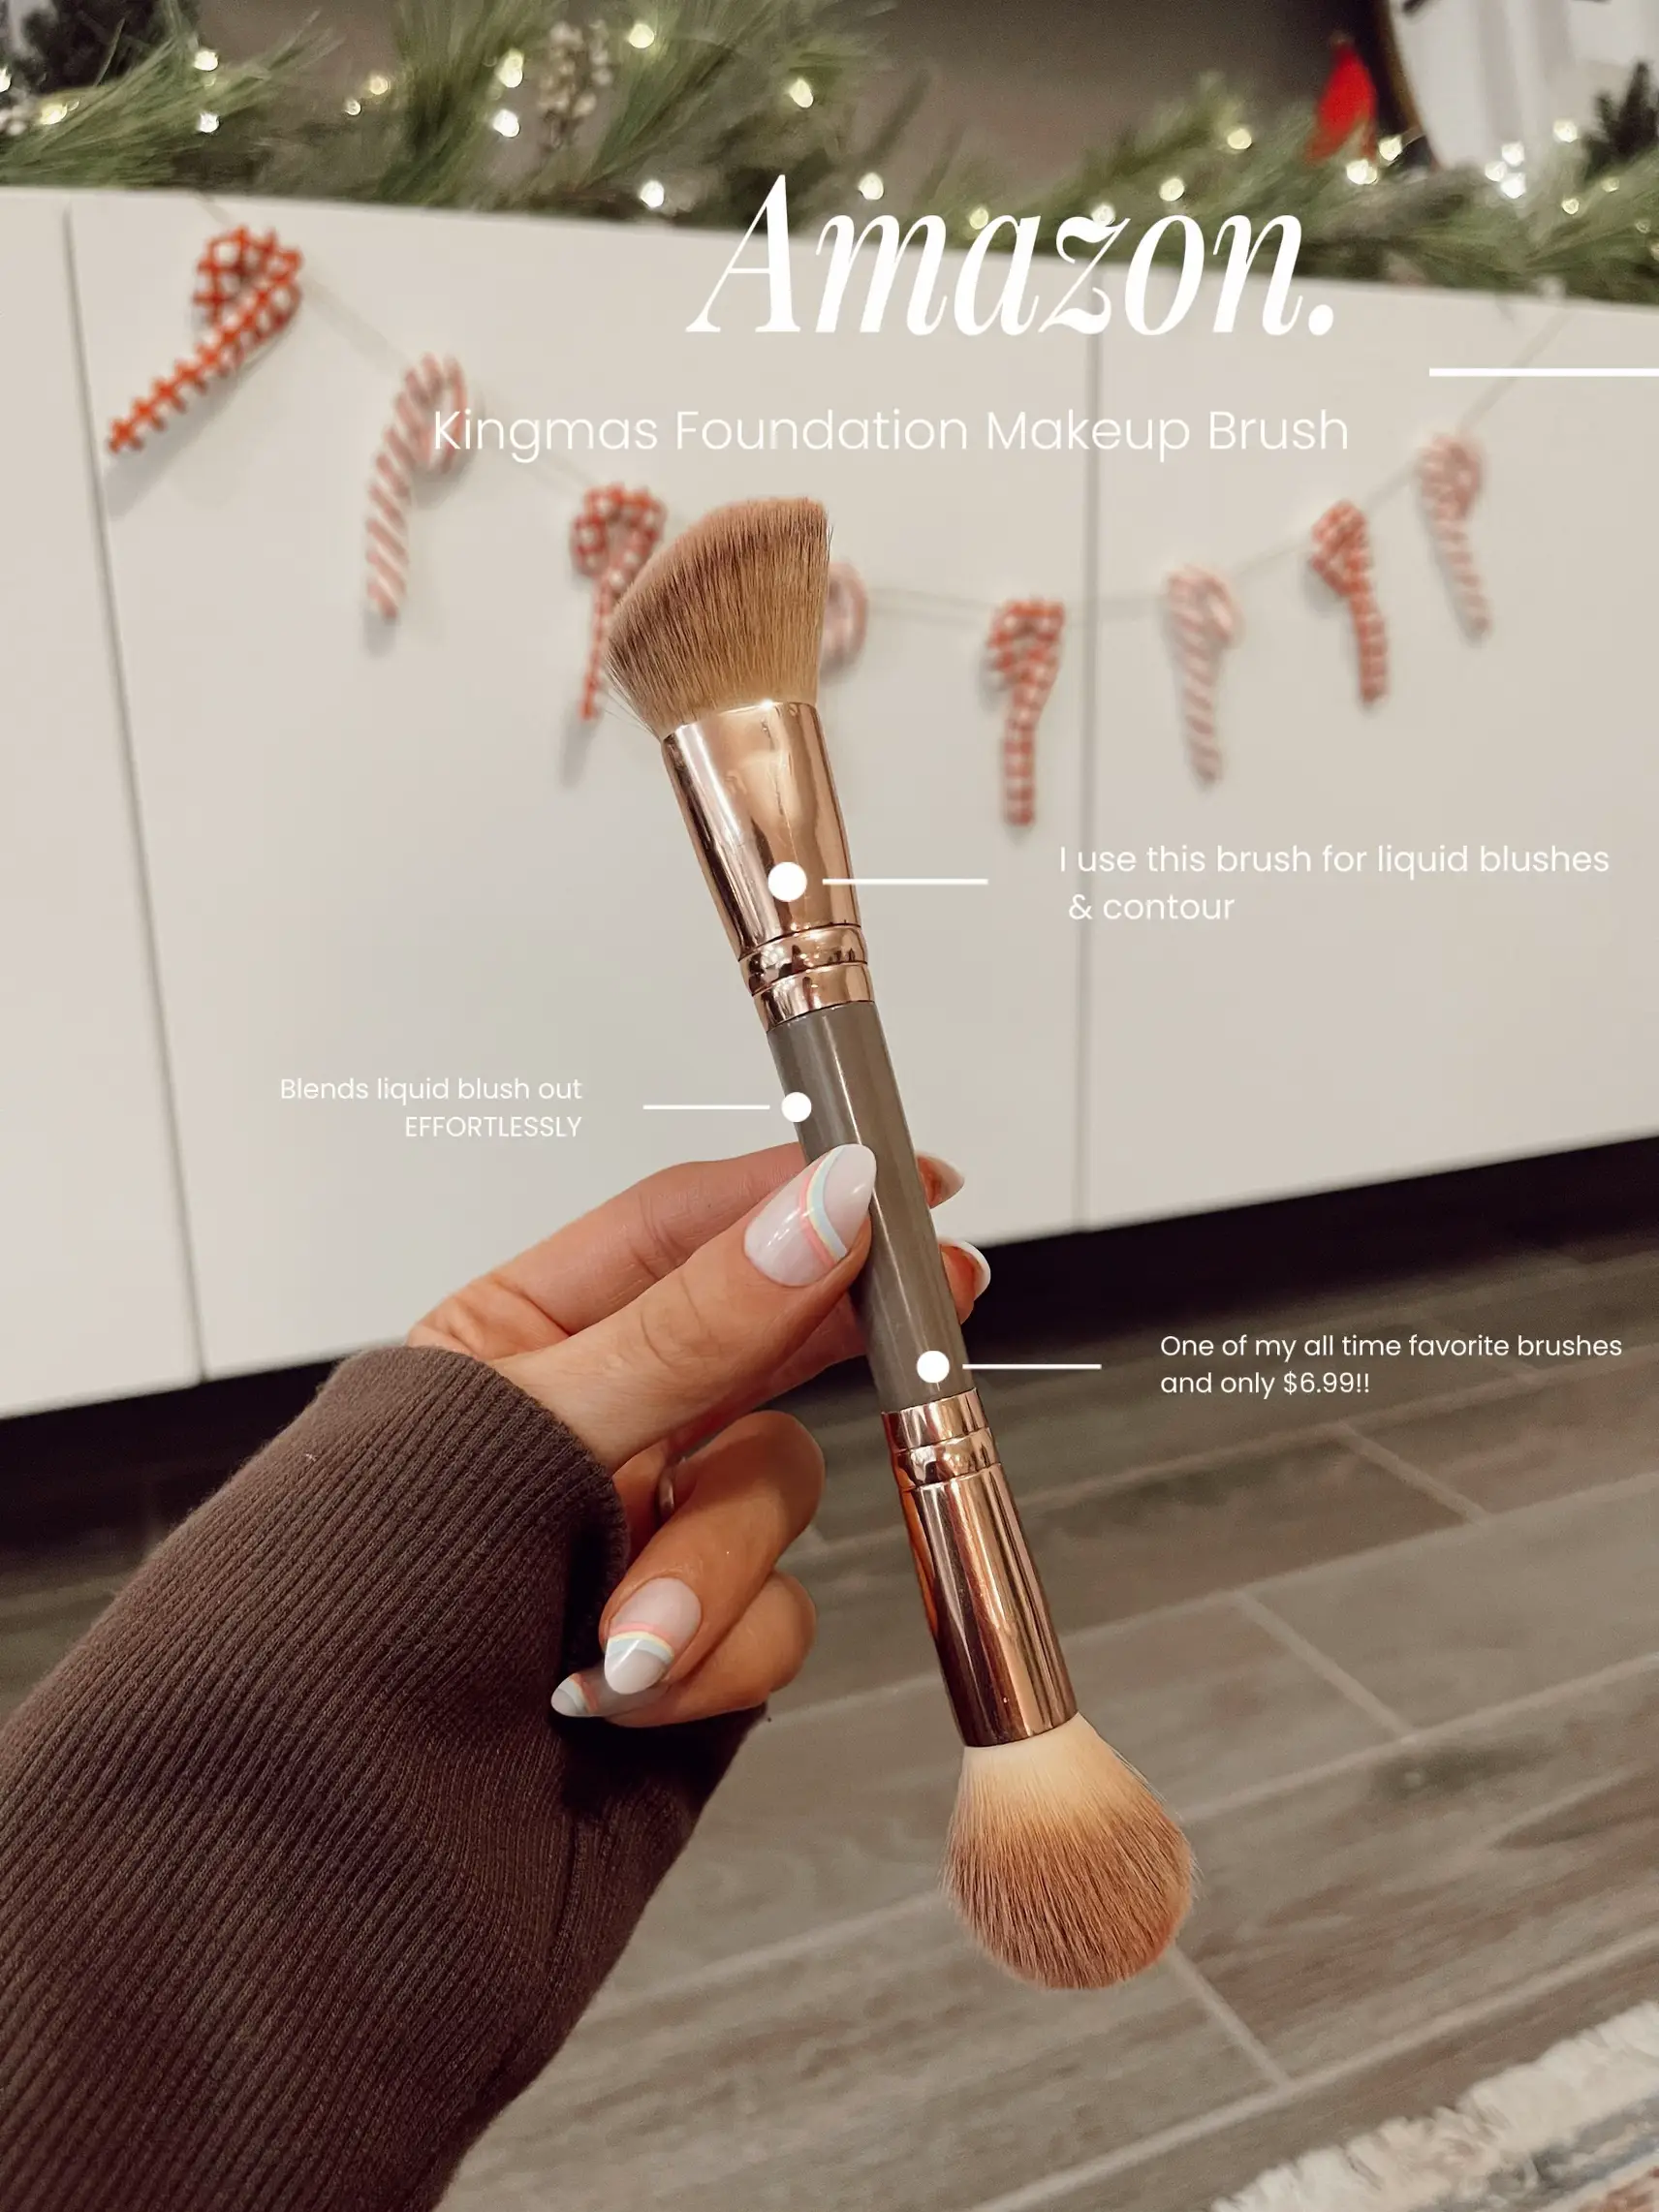  A person is holding a makeup brush in their hand